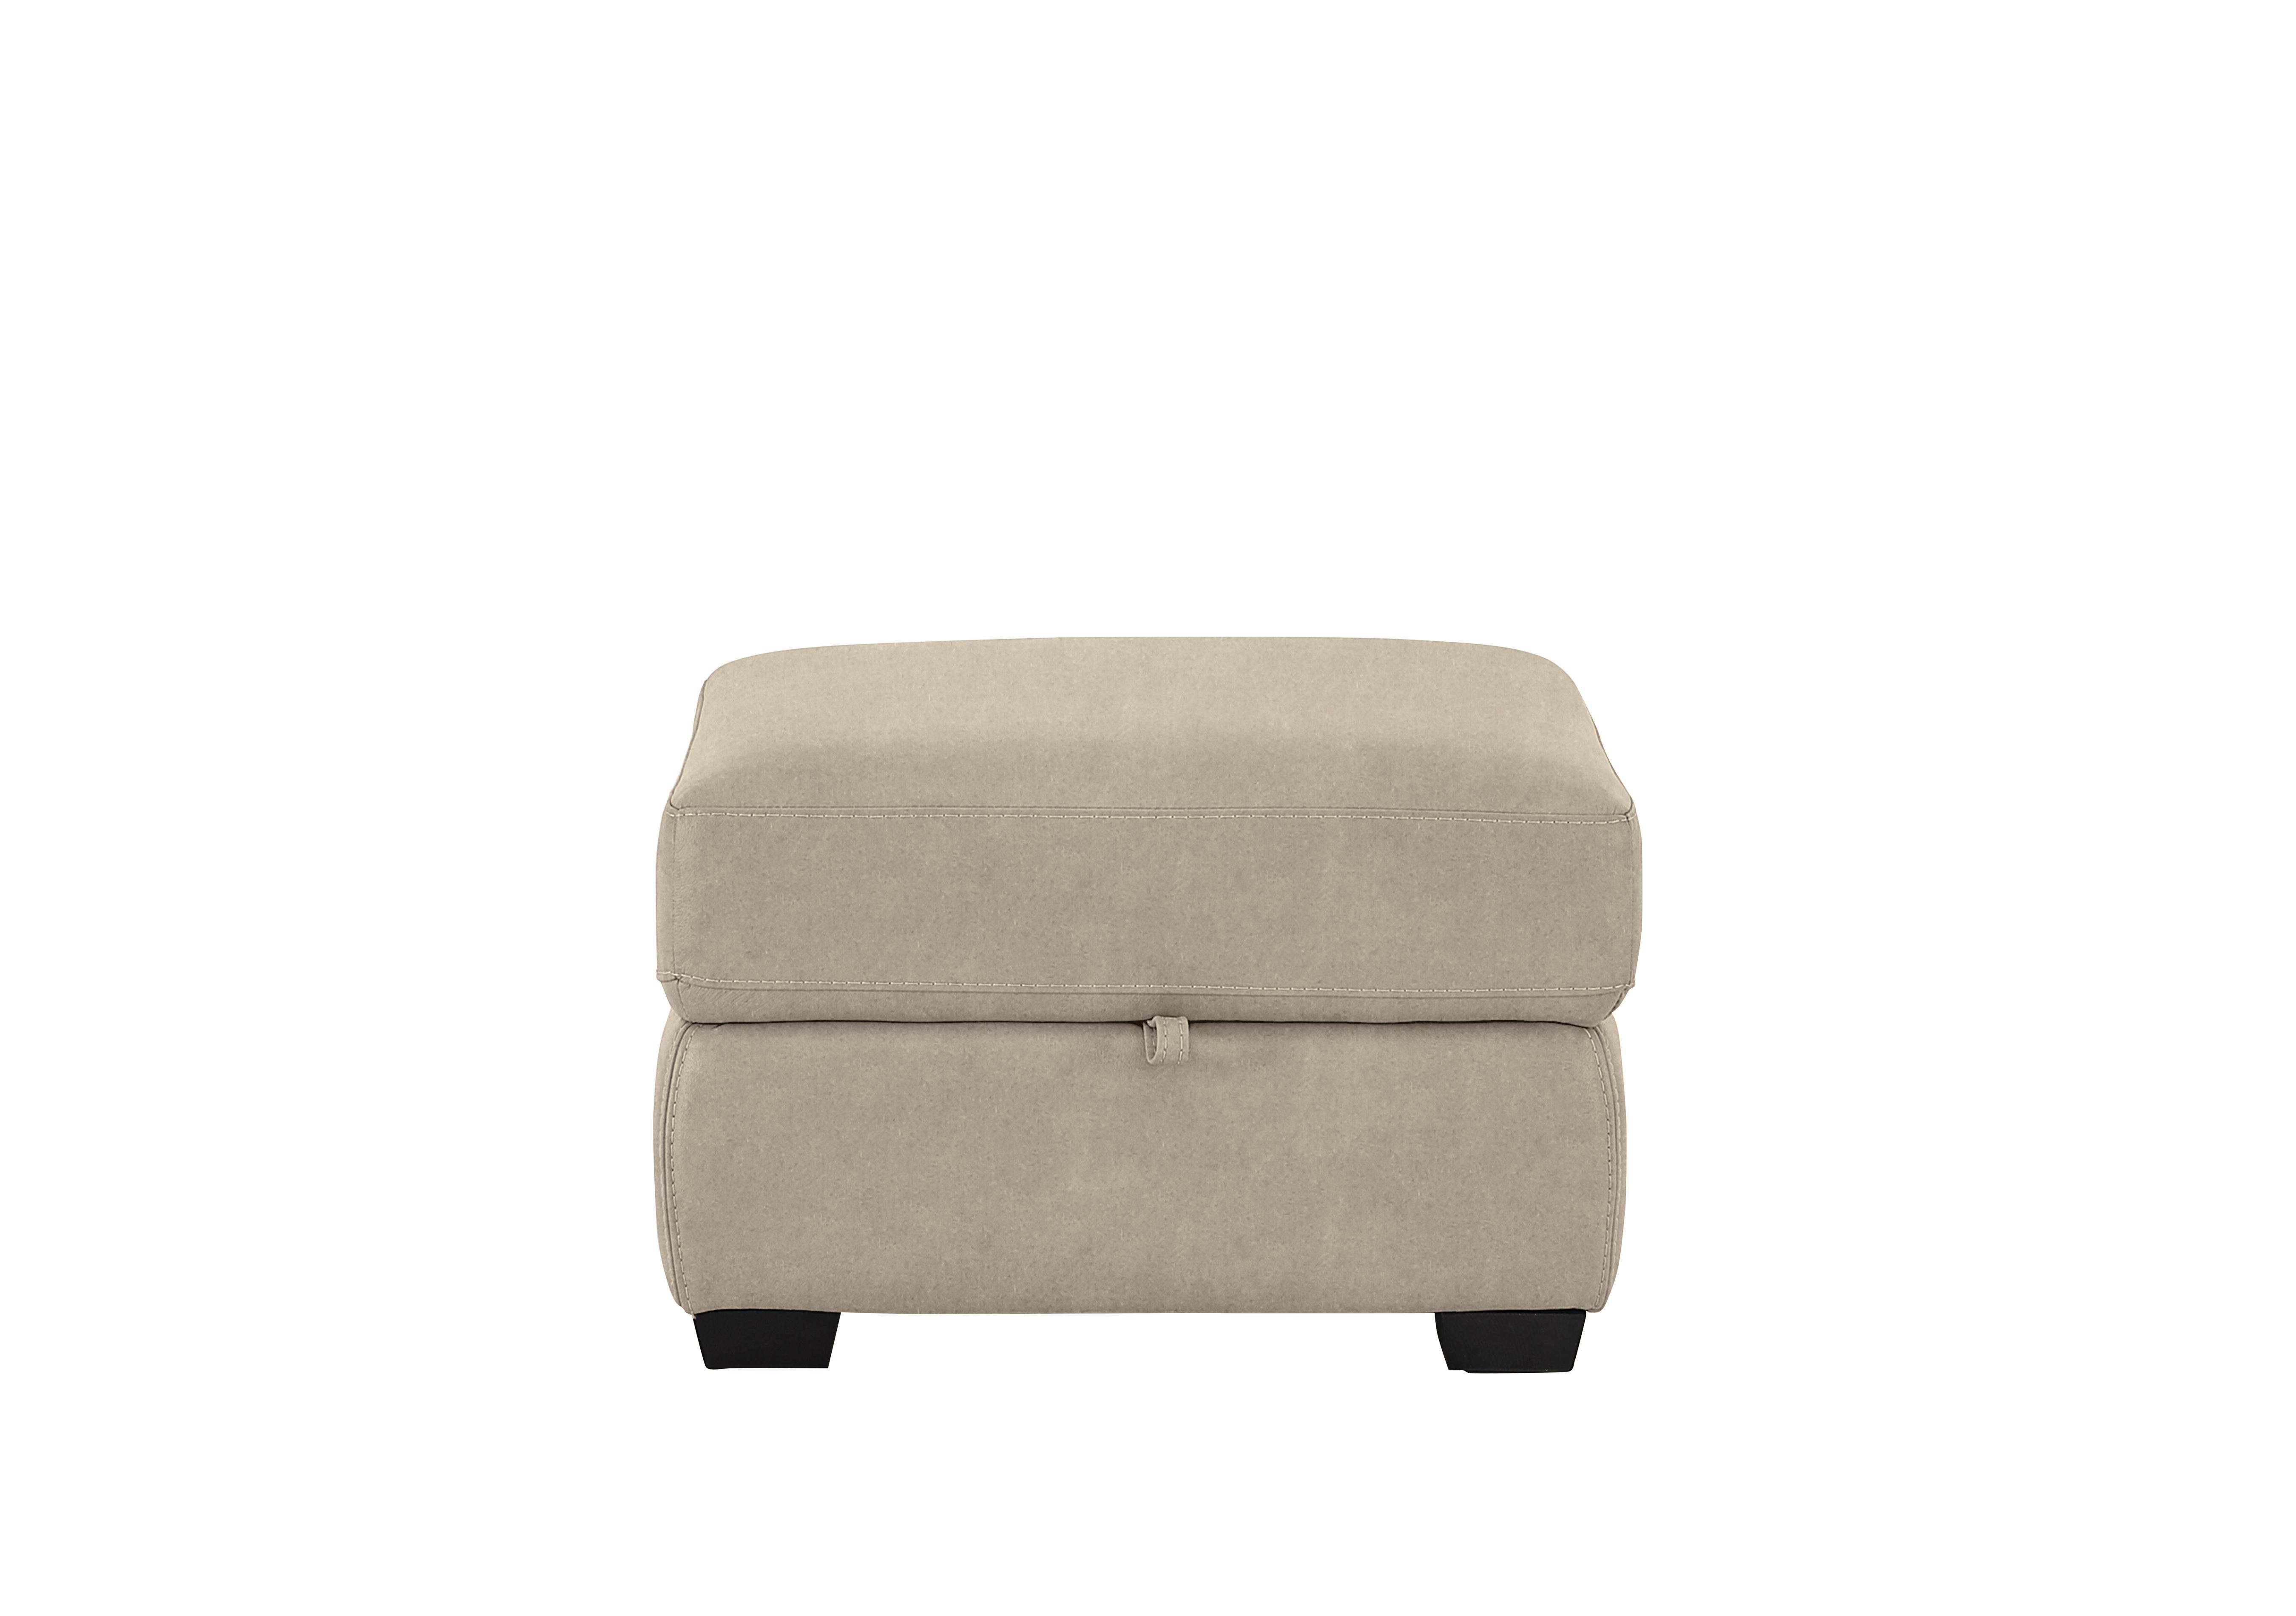 Compact Collection Petit Fabric Storage Footstool in Bfa-Blj-R20 Bisque on Furniture Village